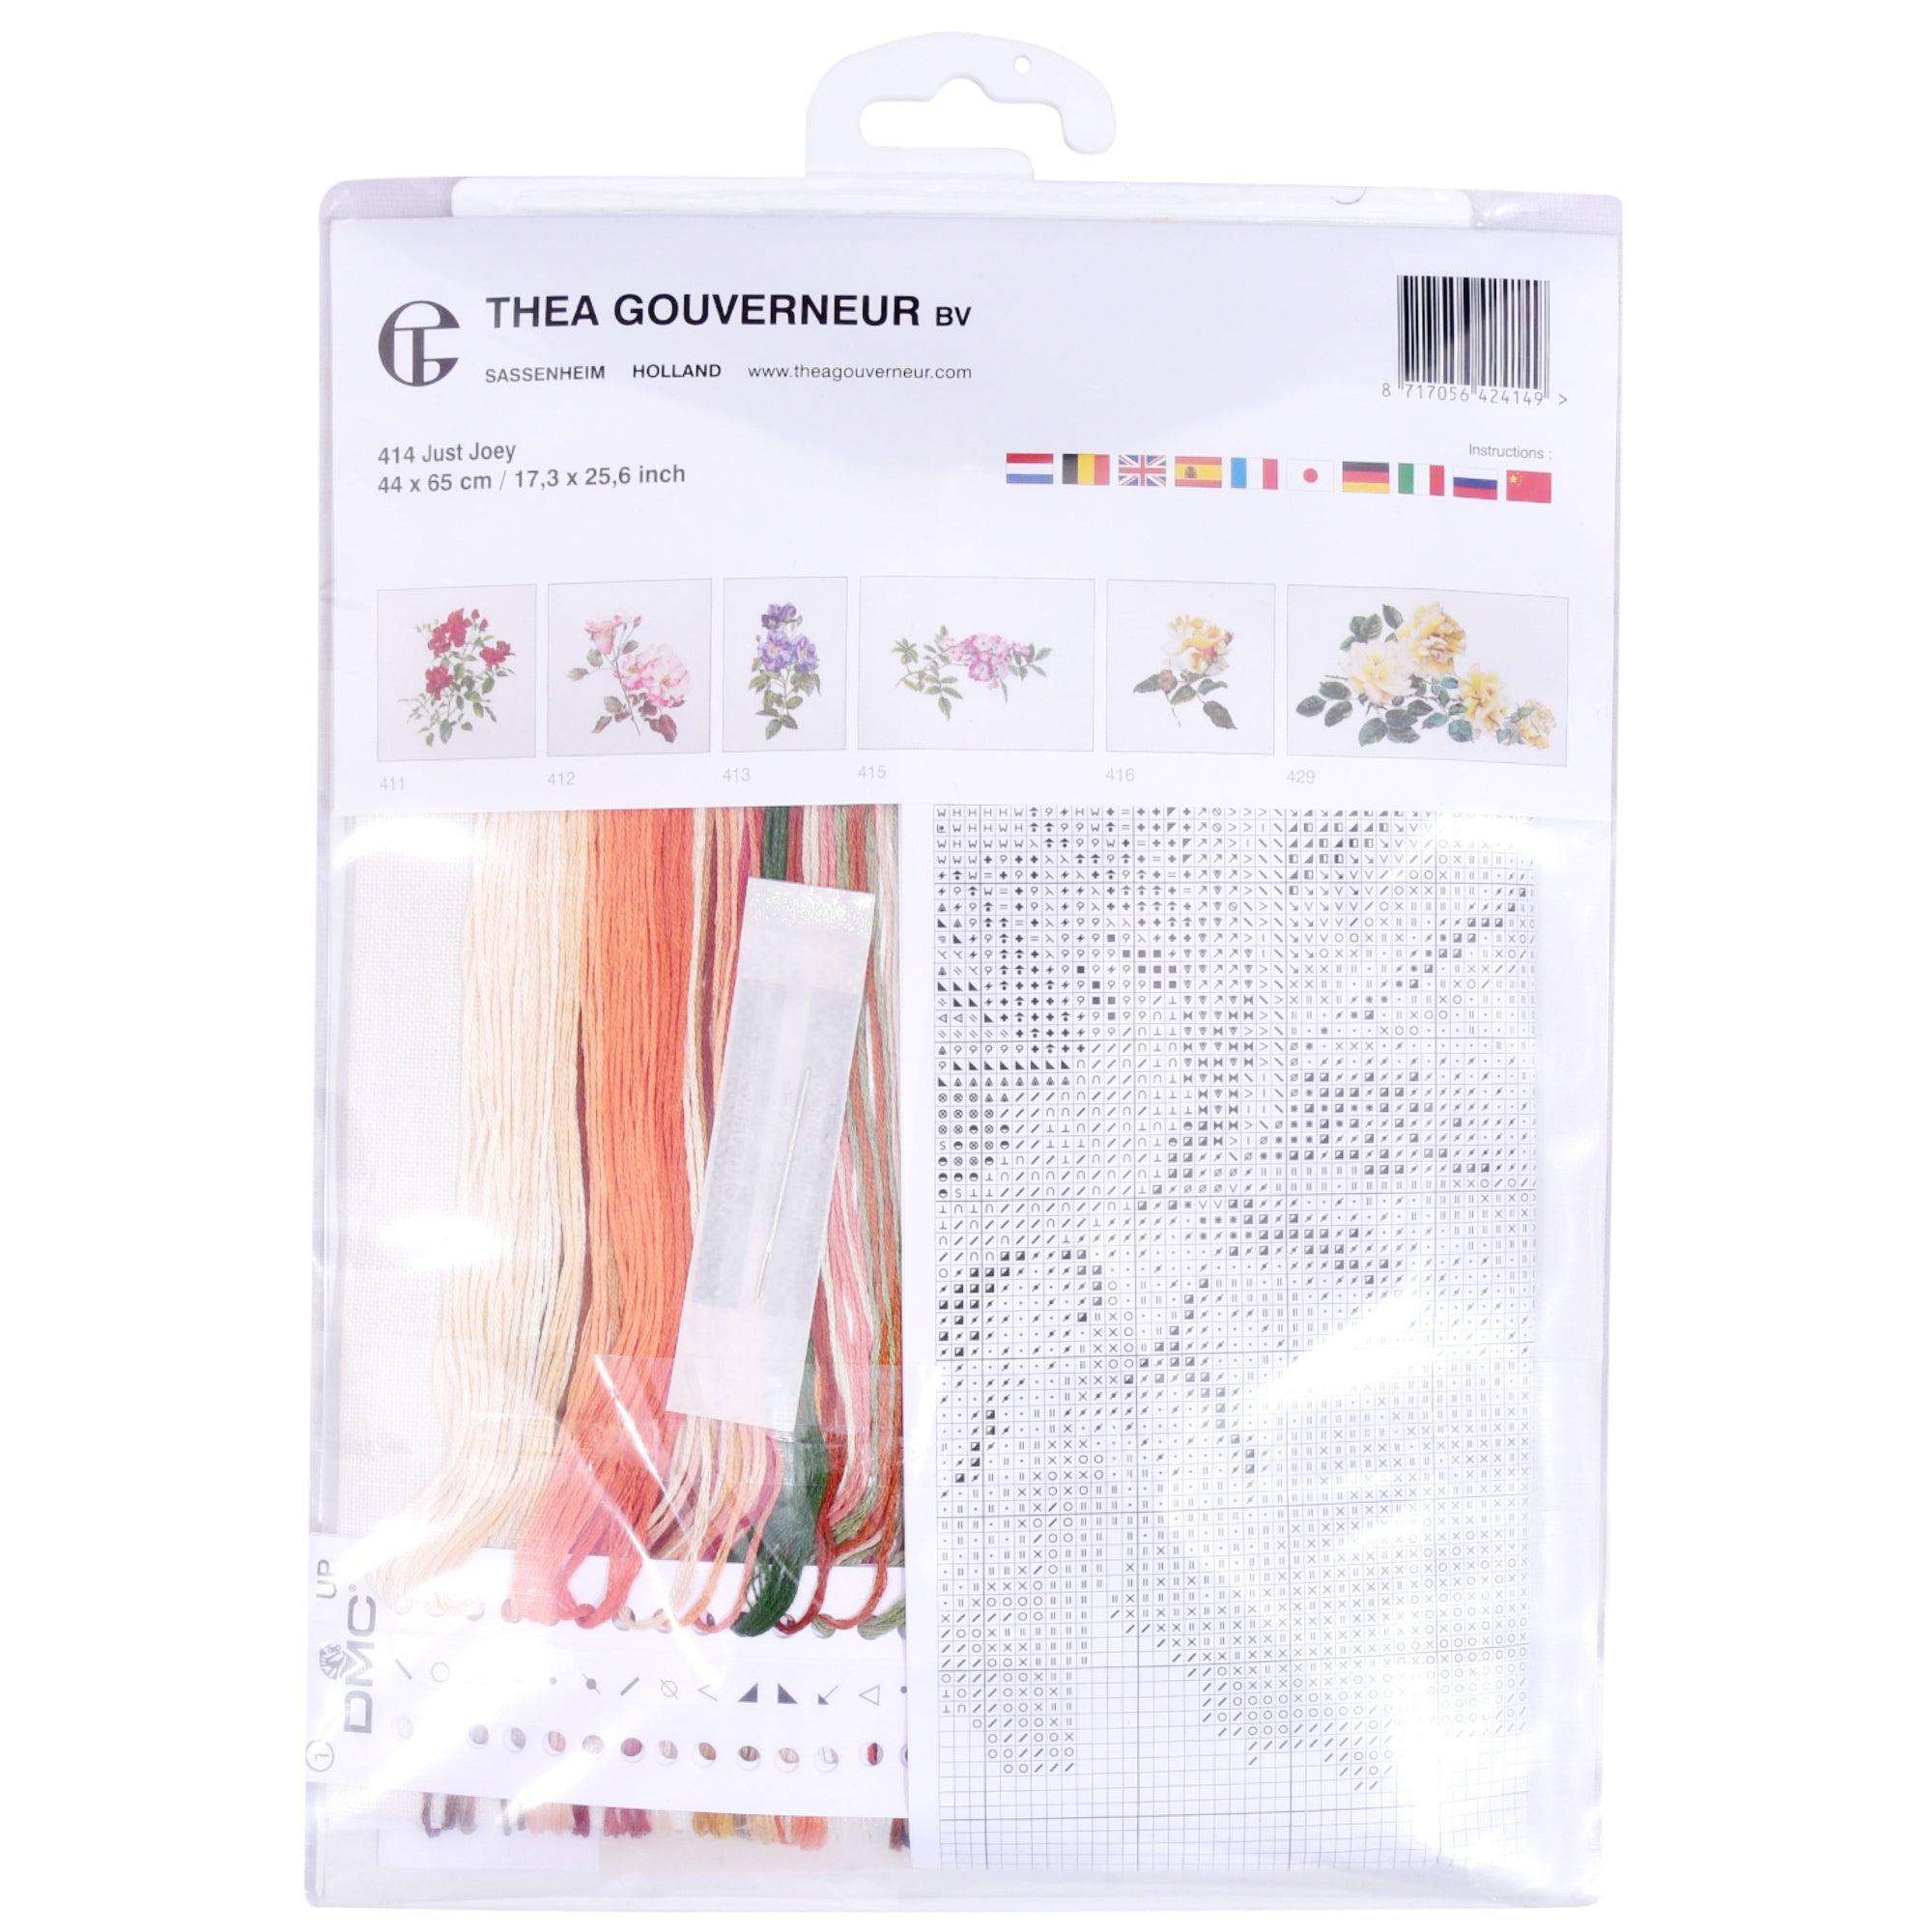 Thea Gouverneur - Counted Cross Stitch Kit - Just Joey - Linen - 36 count - 414 - Thea Gouverneur Since 1959